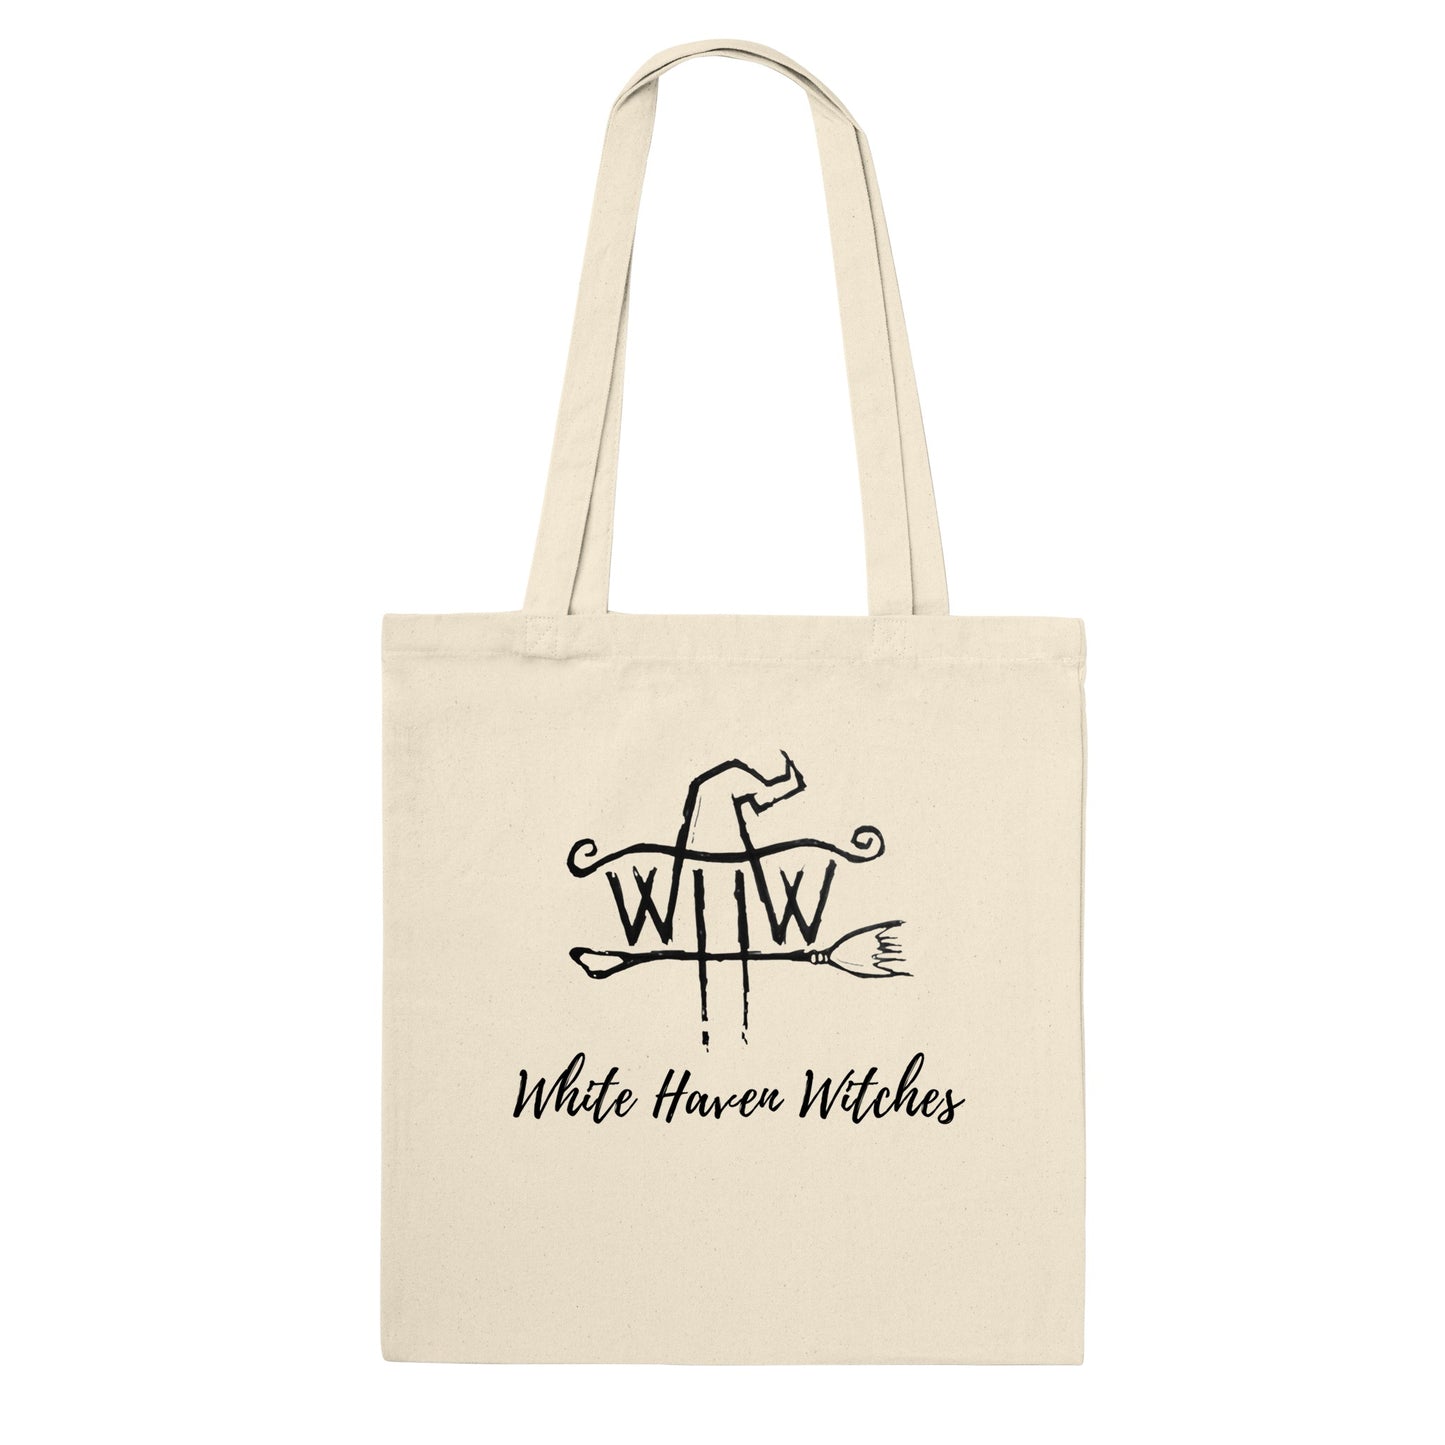 White Haven Witches Tote Bag